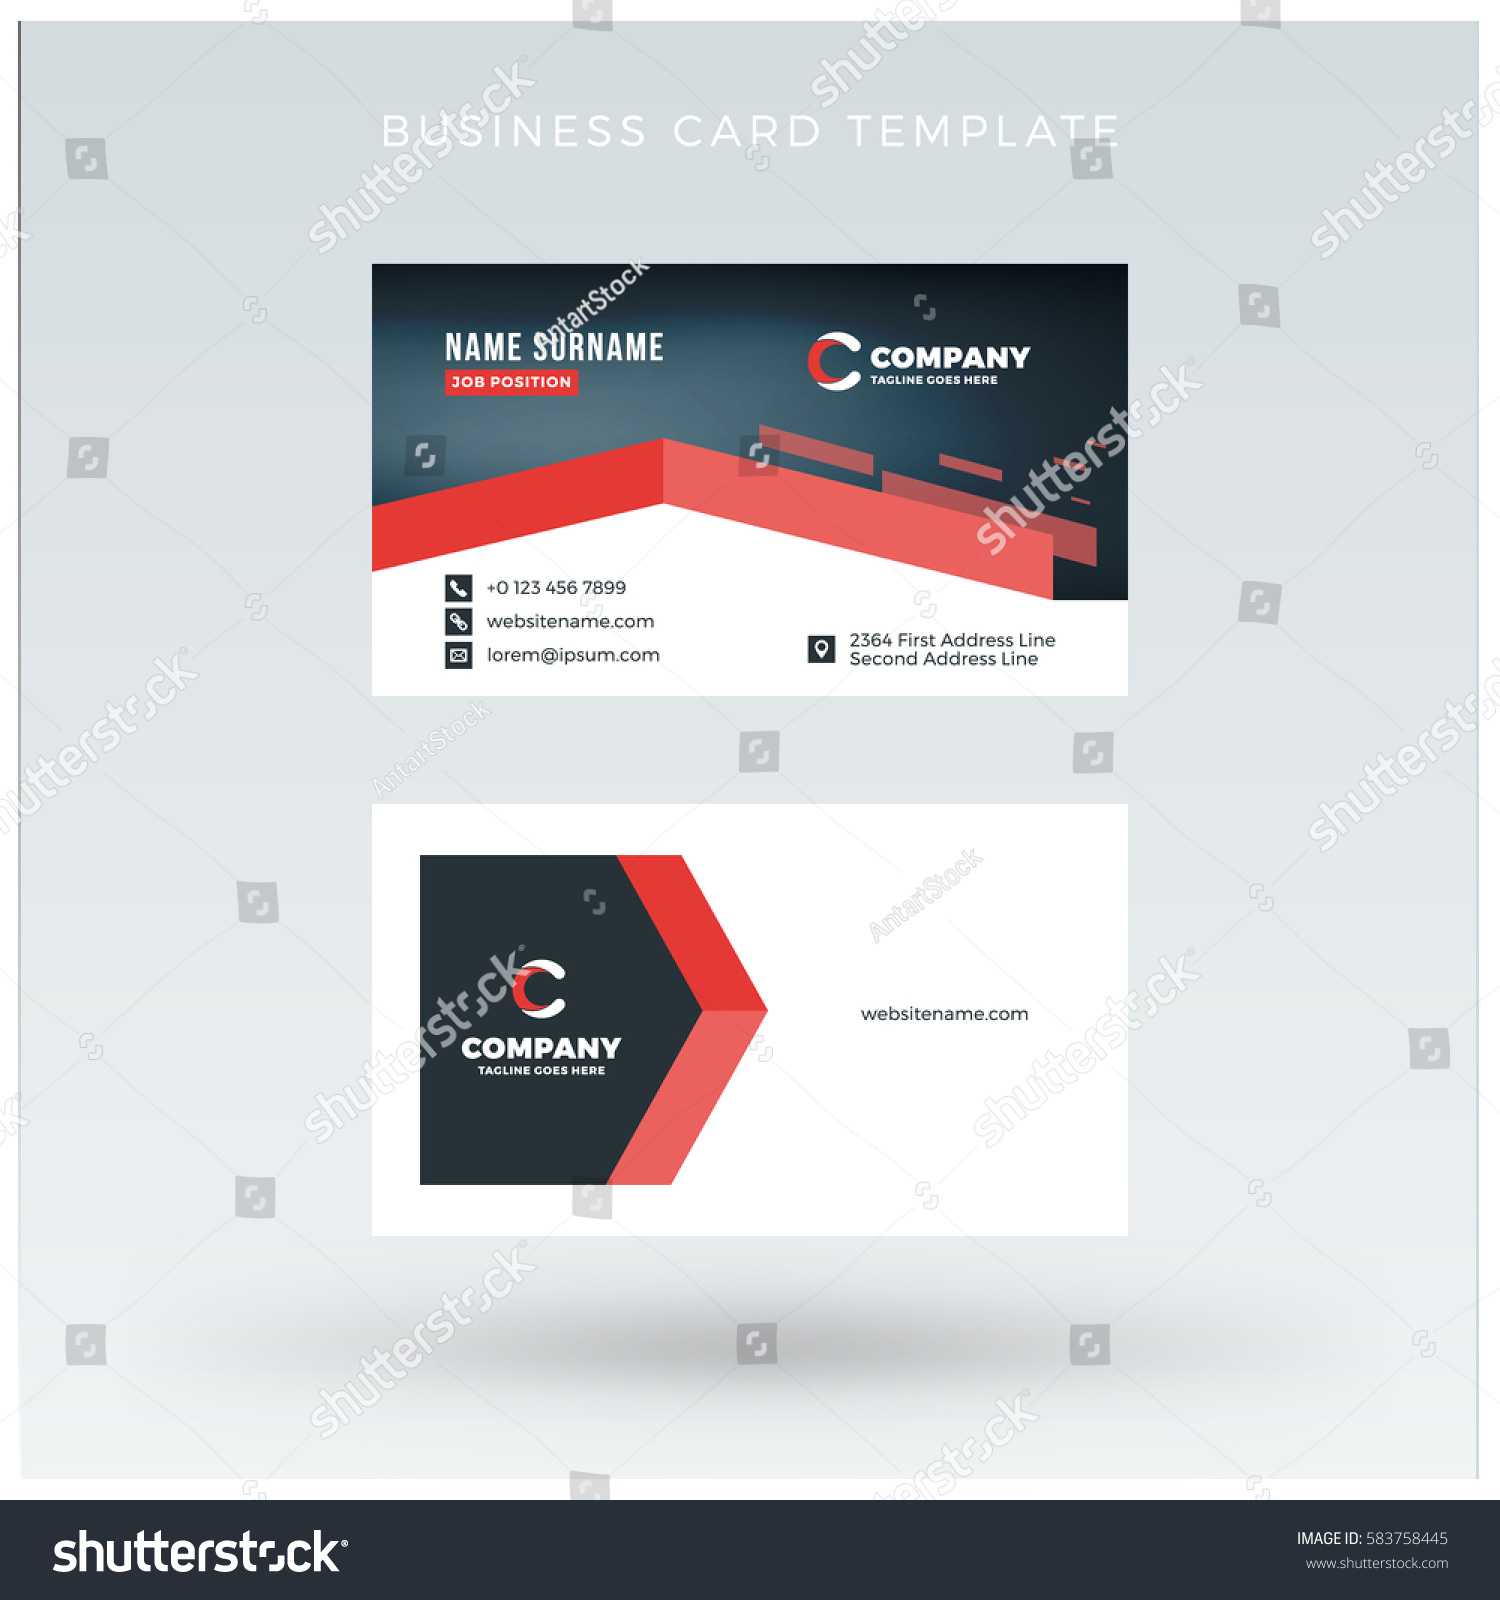 Double Sided Business Card Template Illustrator ] – Double With Double Sided Business Card Template Illustrator